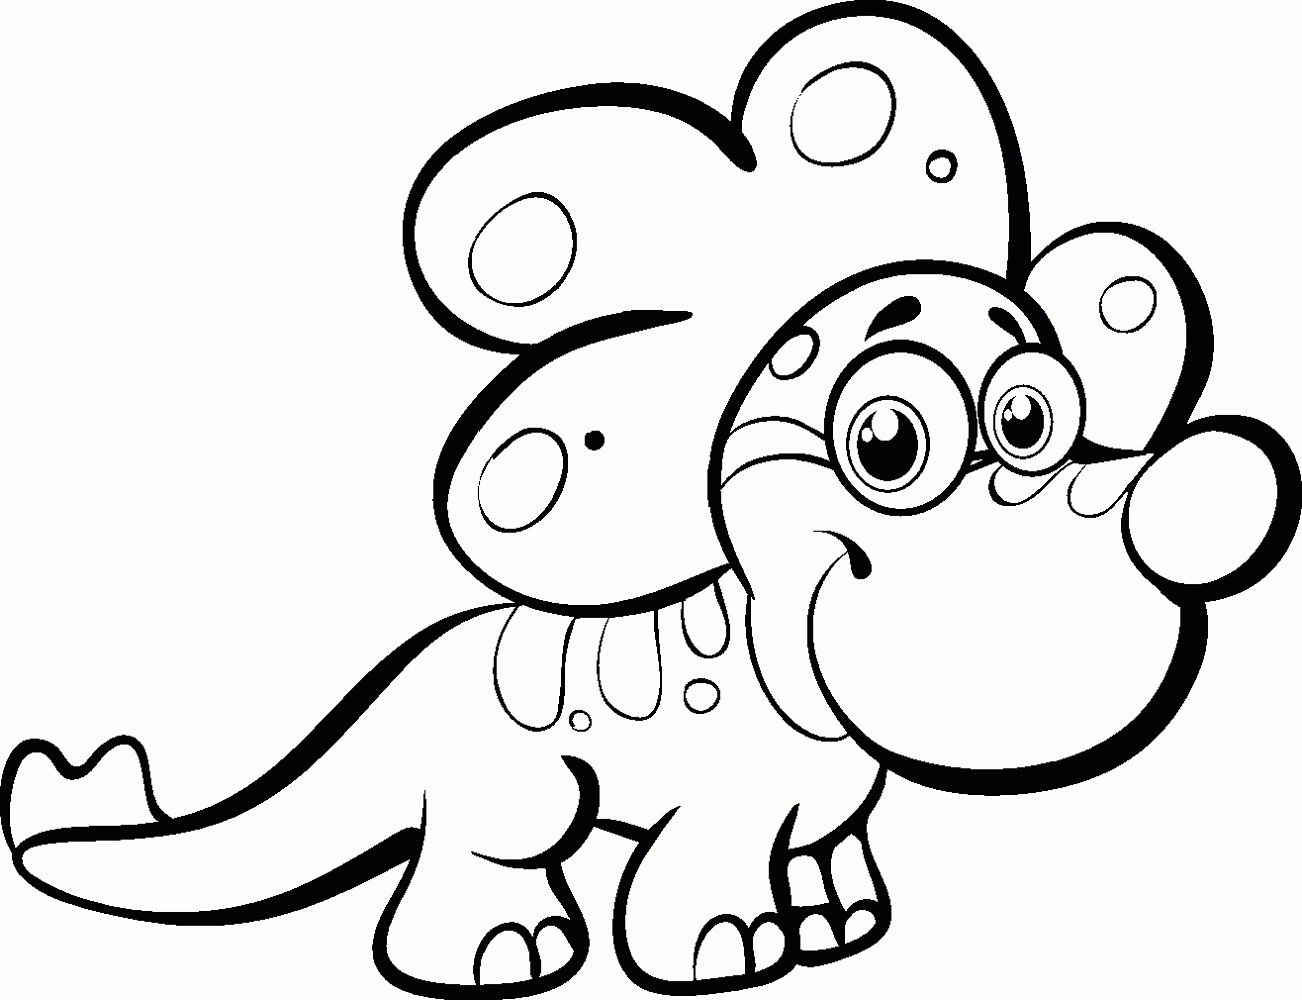 Download Baby Dinosaur Coloring Pages for Preschoolers | Activity Shelter